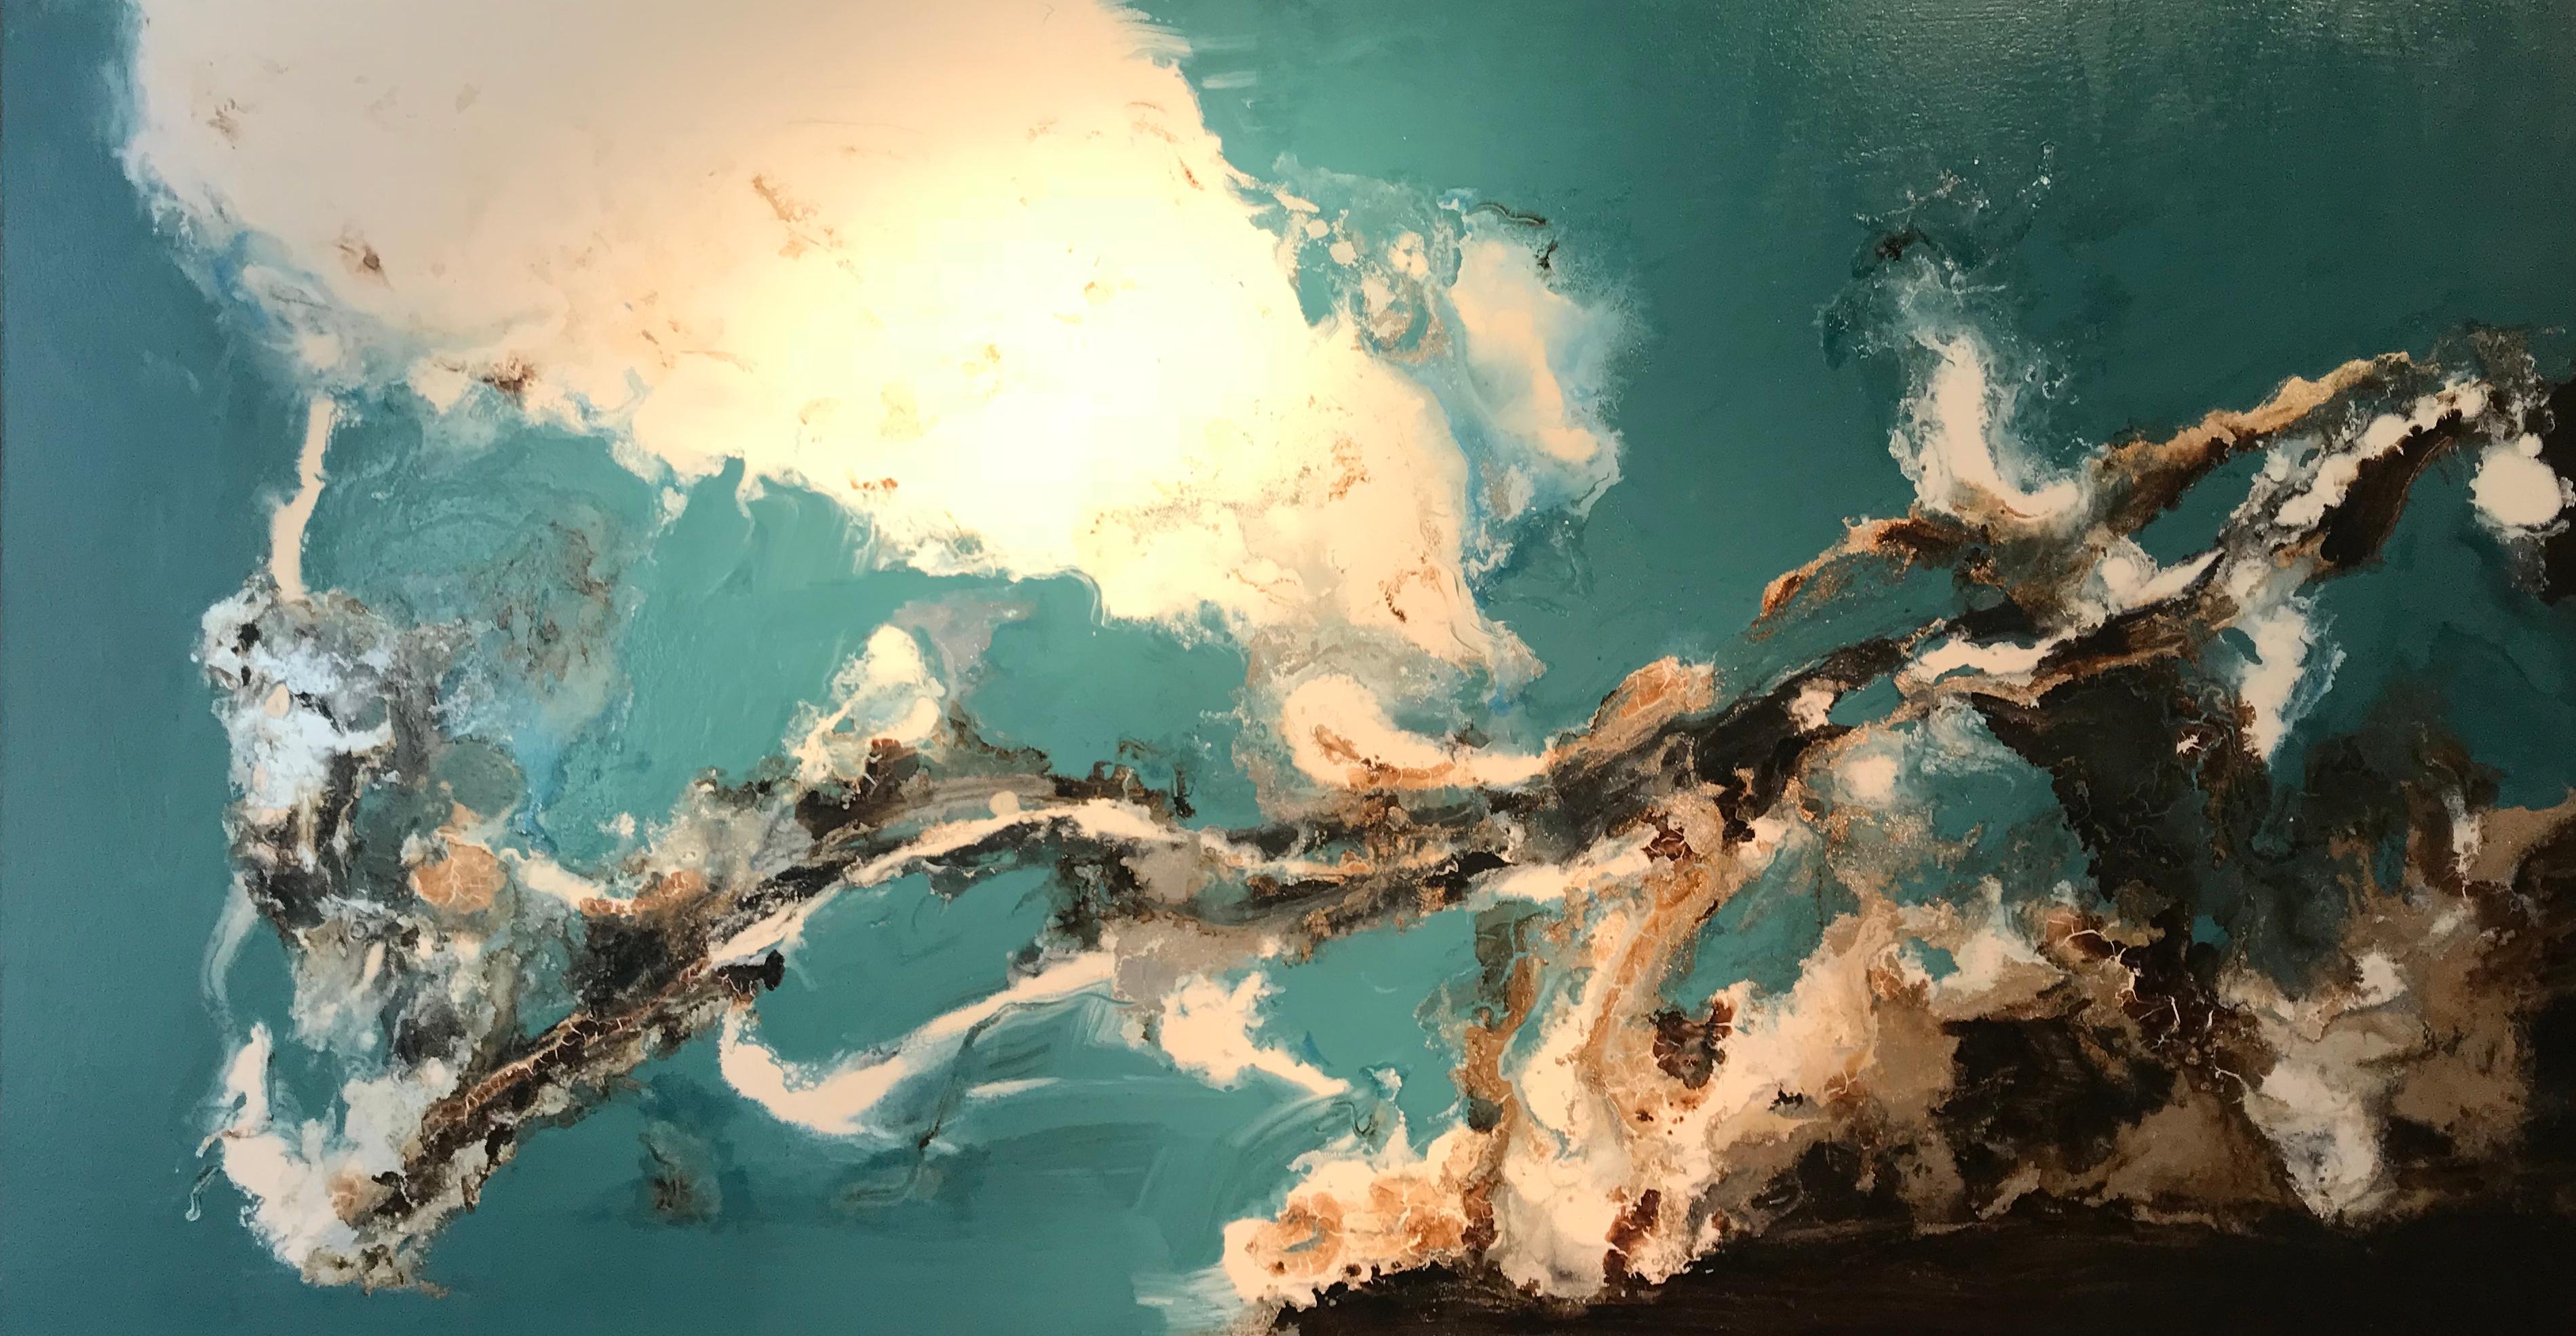 Mixed Media Contemporary Abstract Painting 'Turquoise Waters' by Kevin Burton 